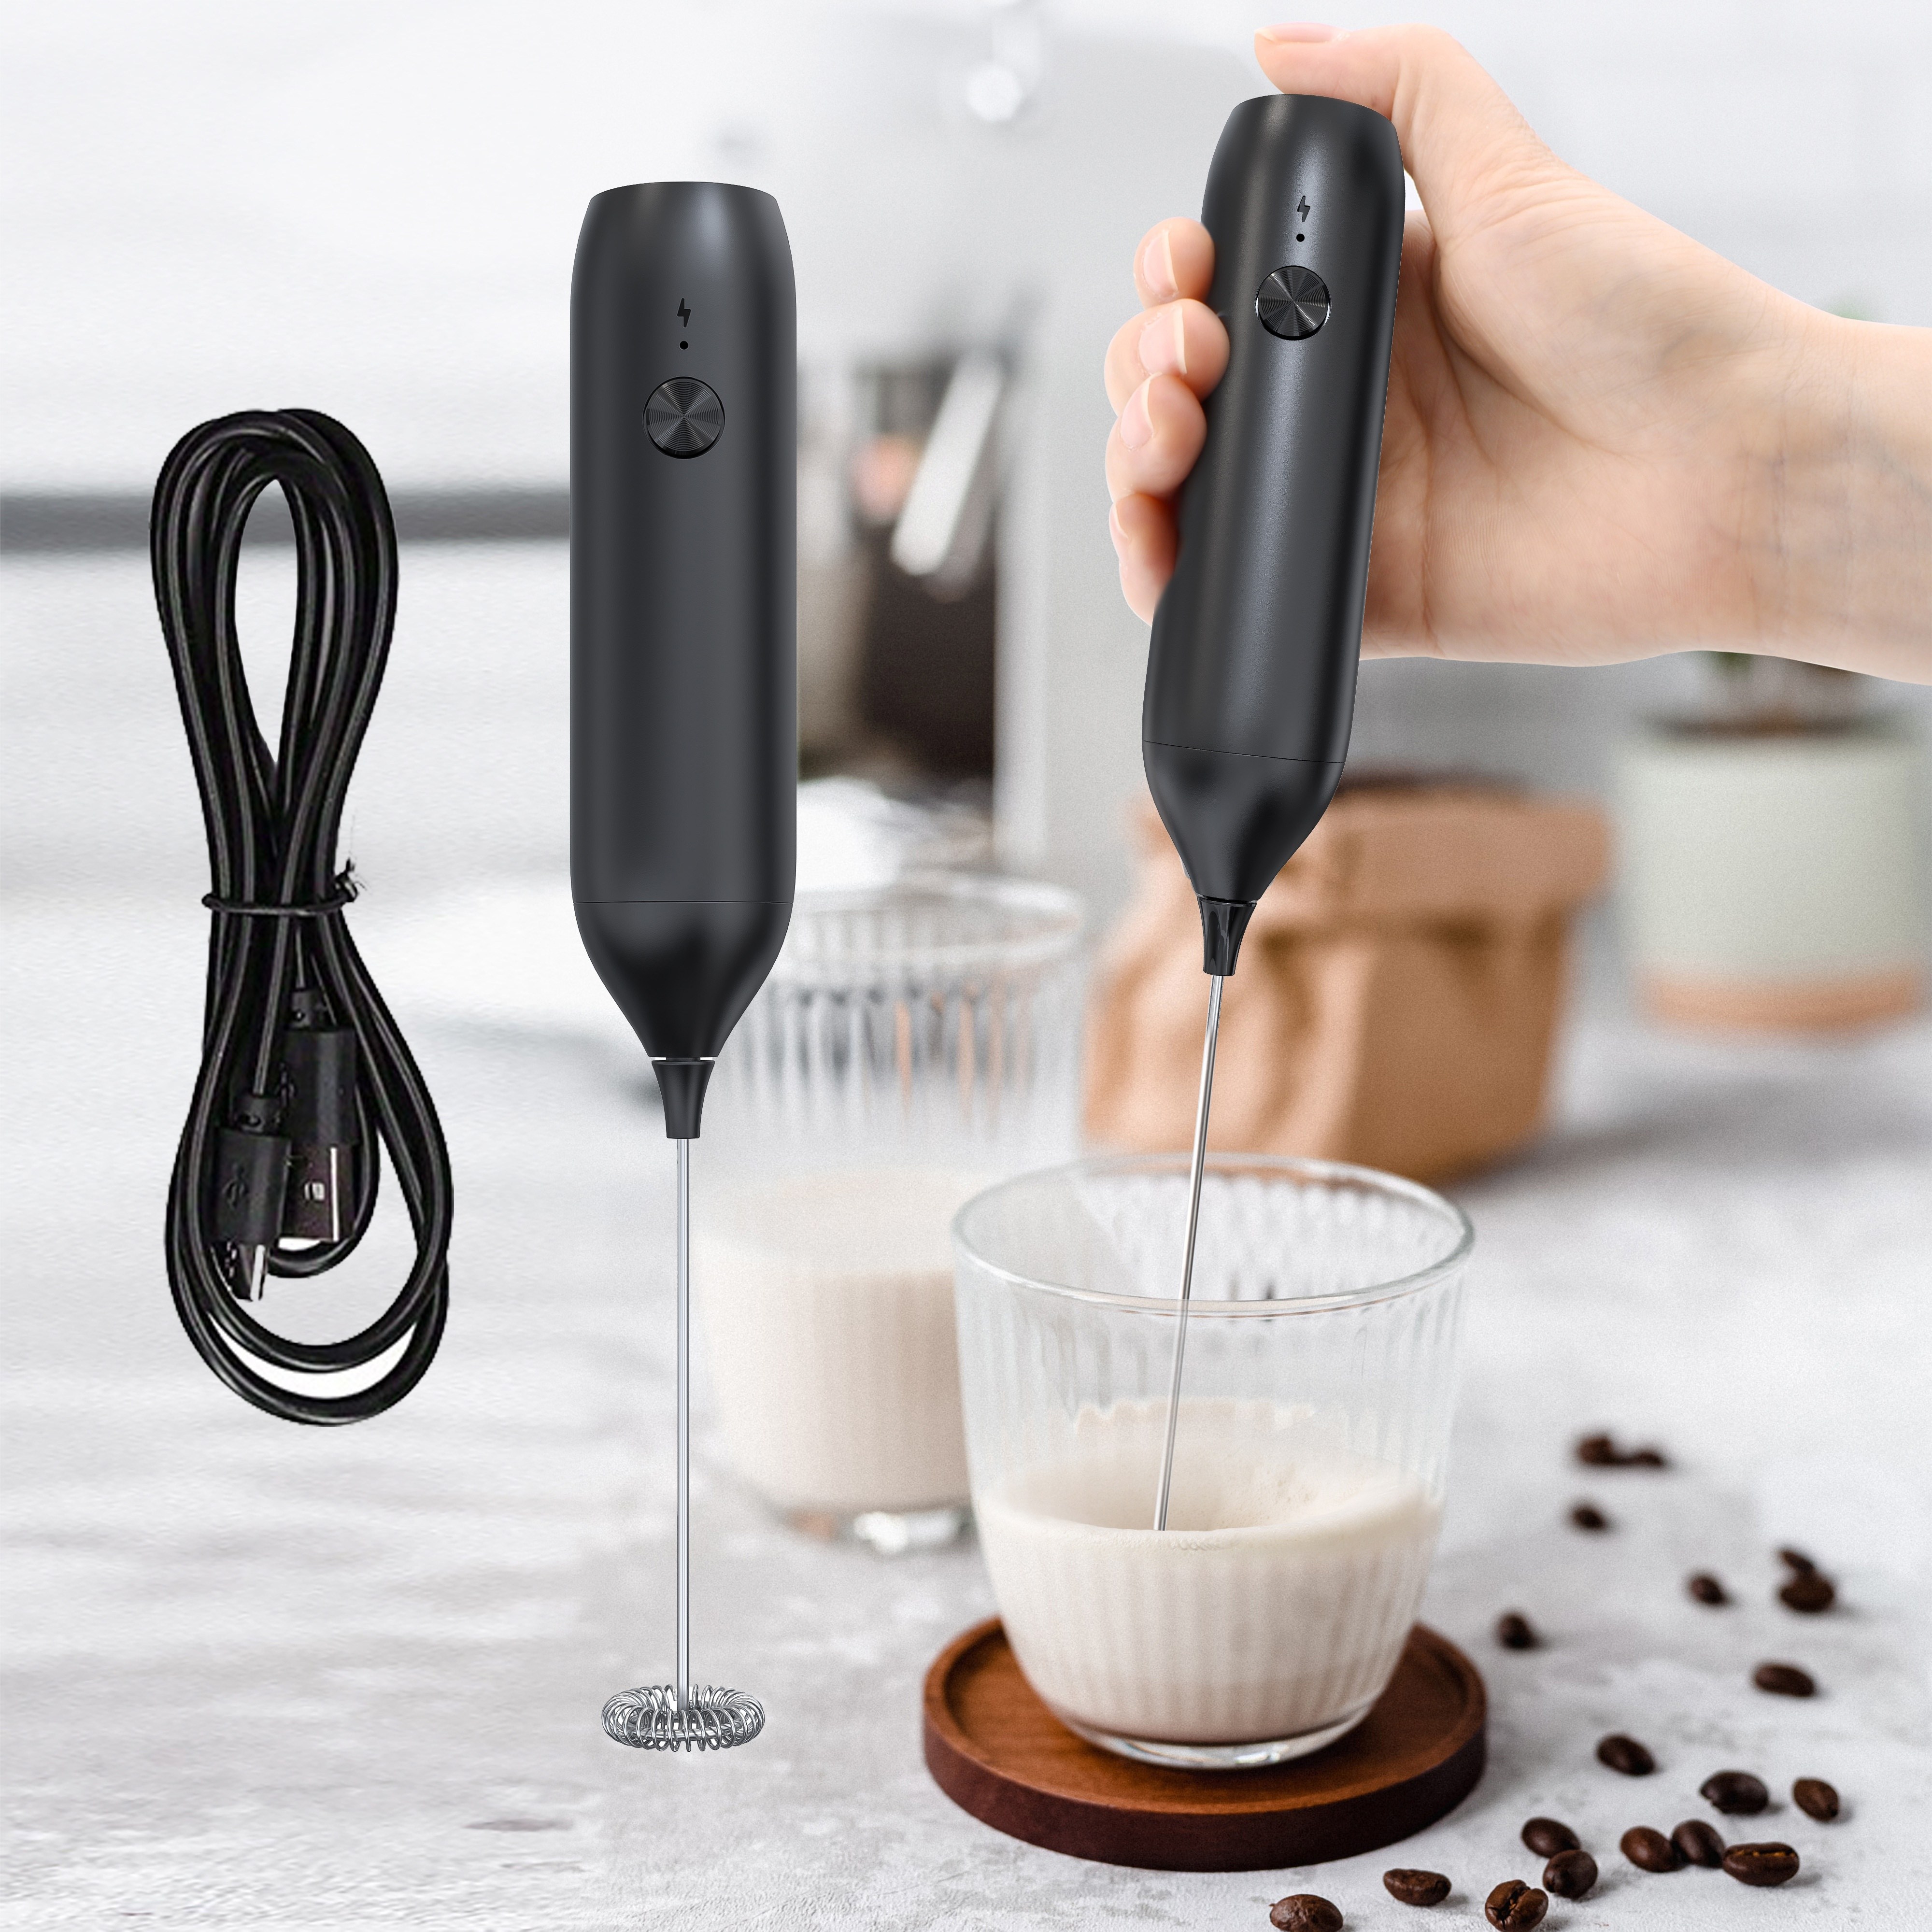 Milk Frother Handheld Detachable with Egg Beating Head, Stand